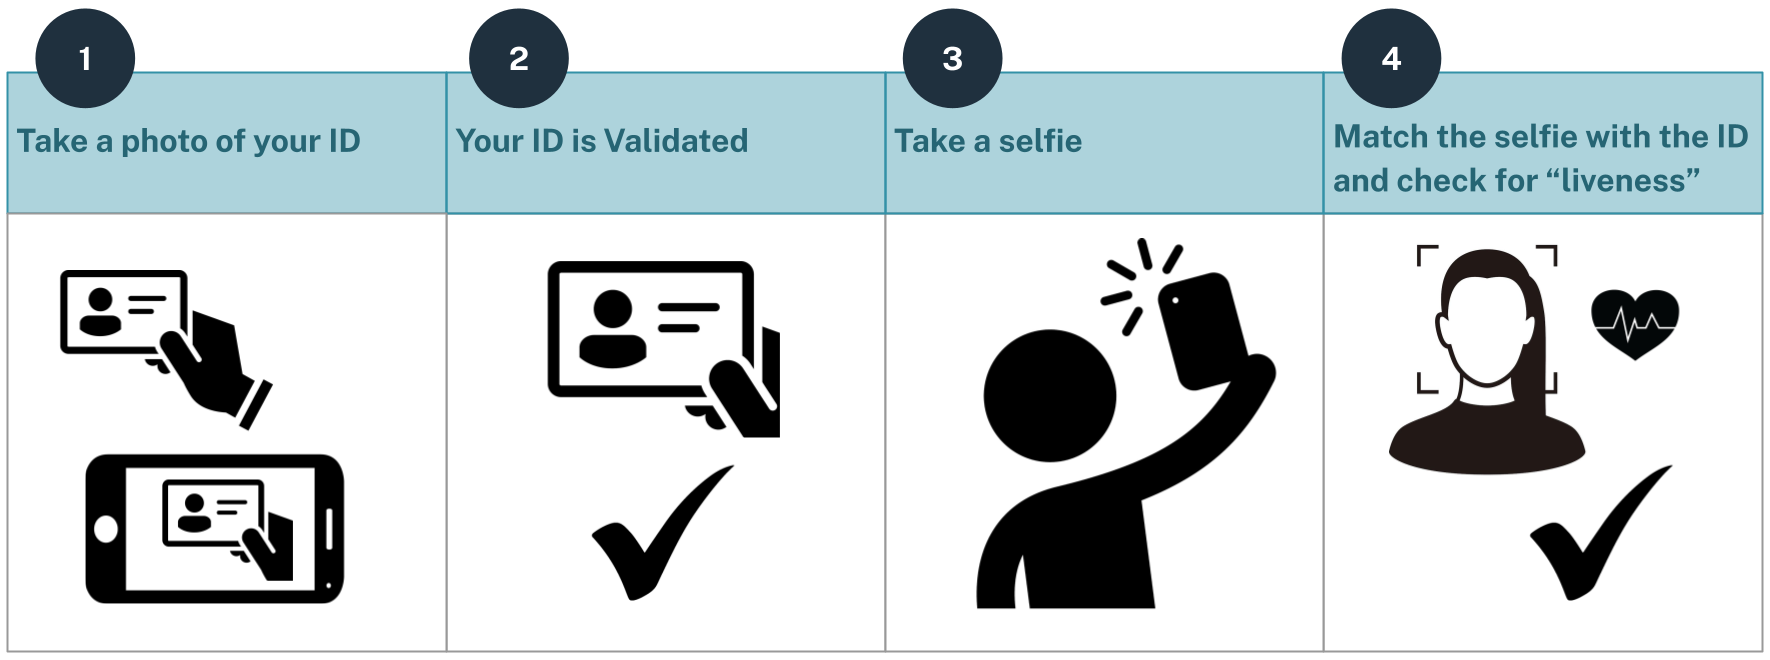 This image depicts the biometric step of identity verification